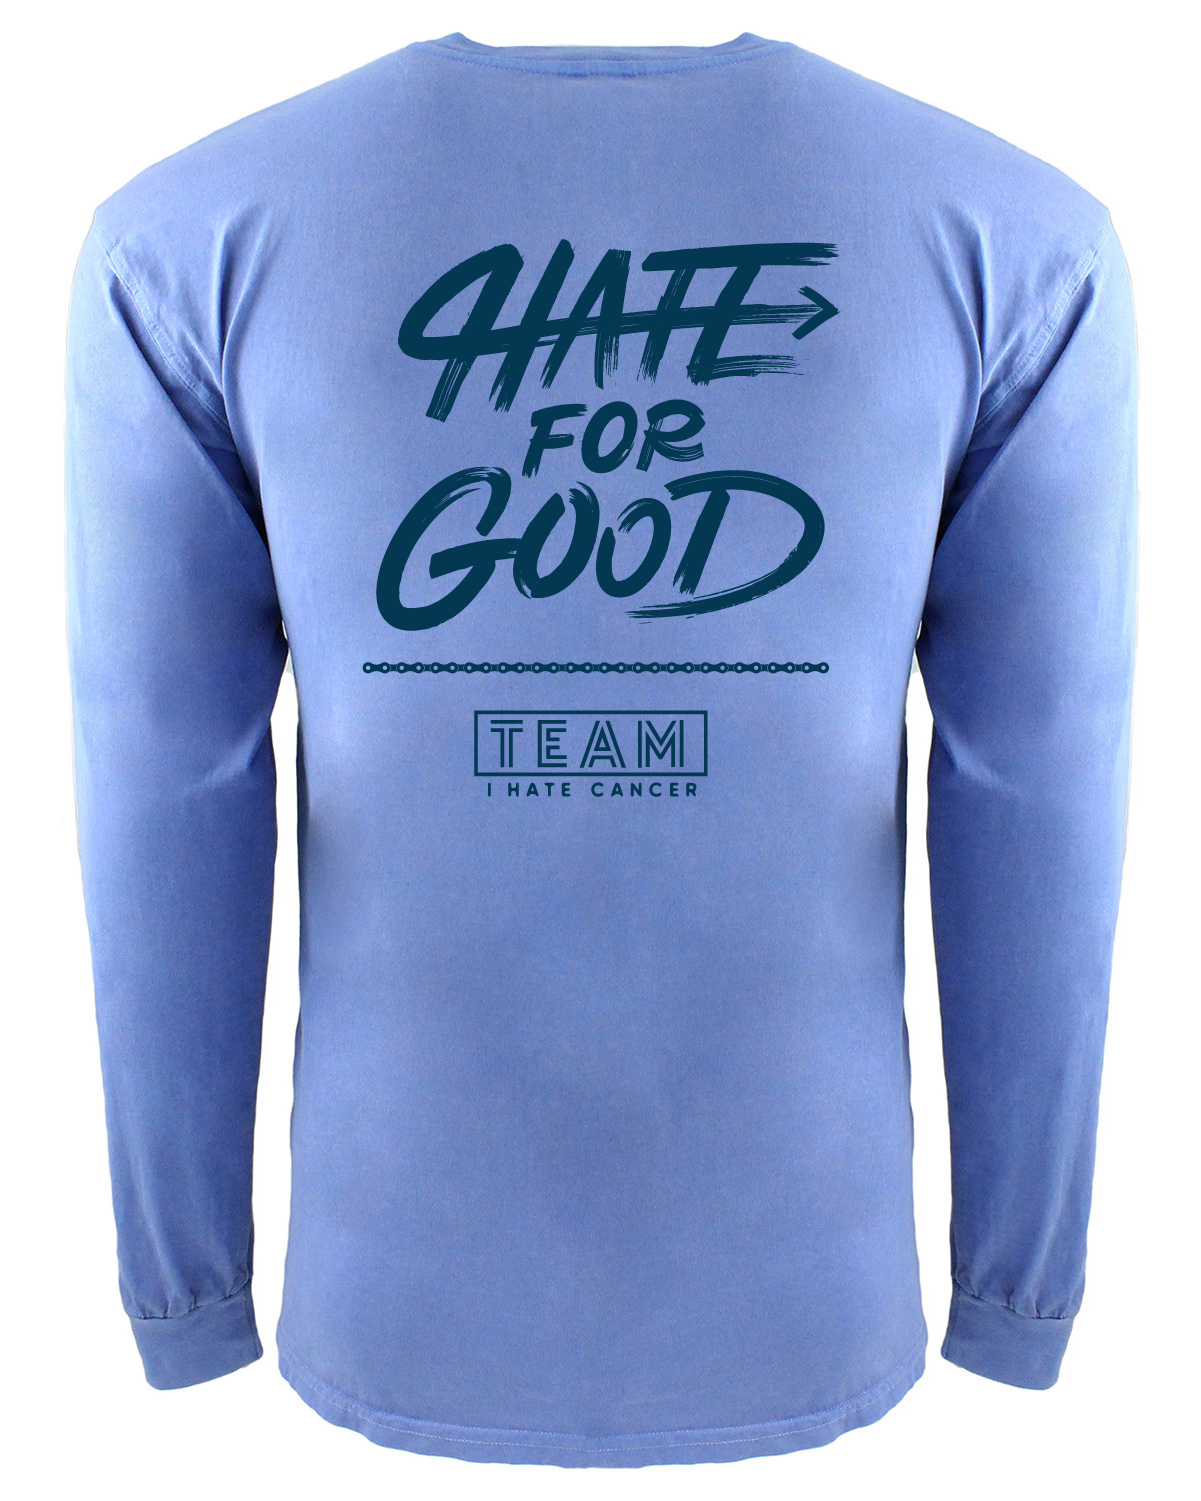 Sale - Hate For Good Fishing Shirt — Team I Hate Cancer